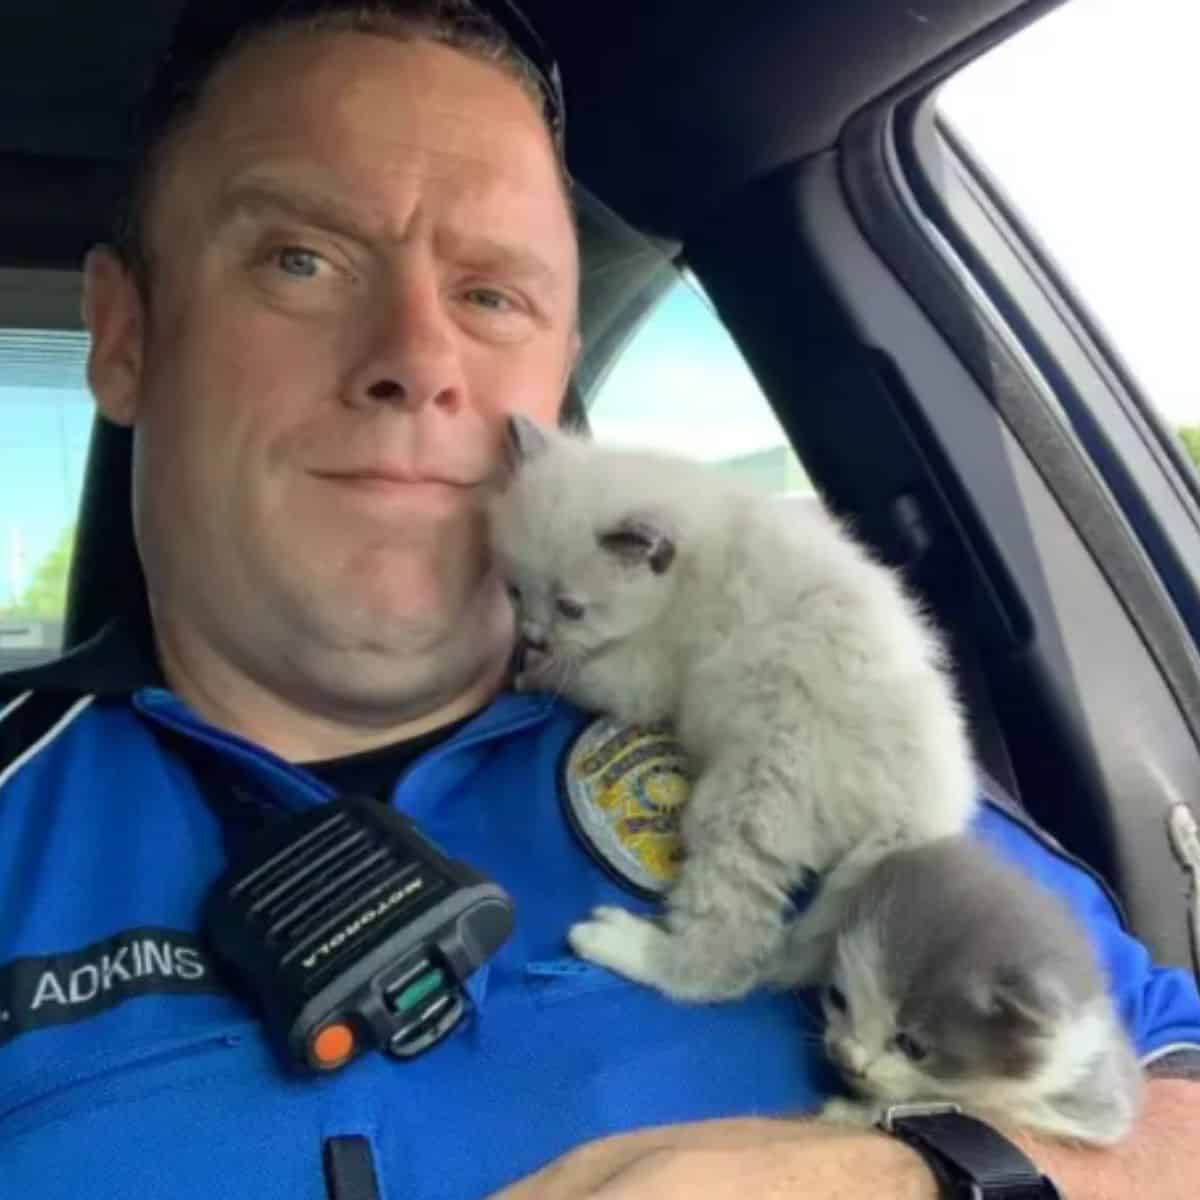 the policeman takes a picture with a cute kitten on his chest